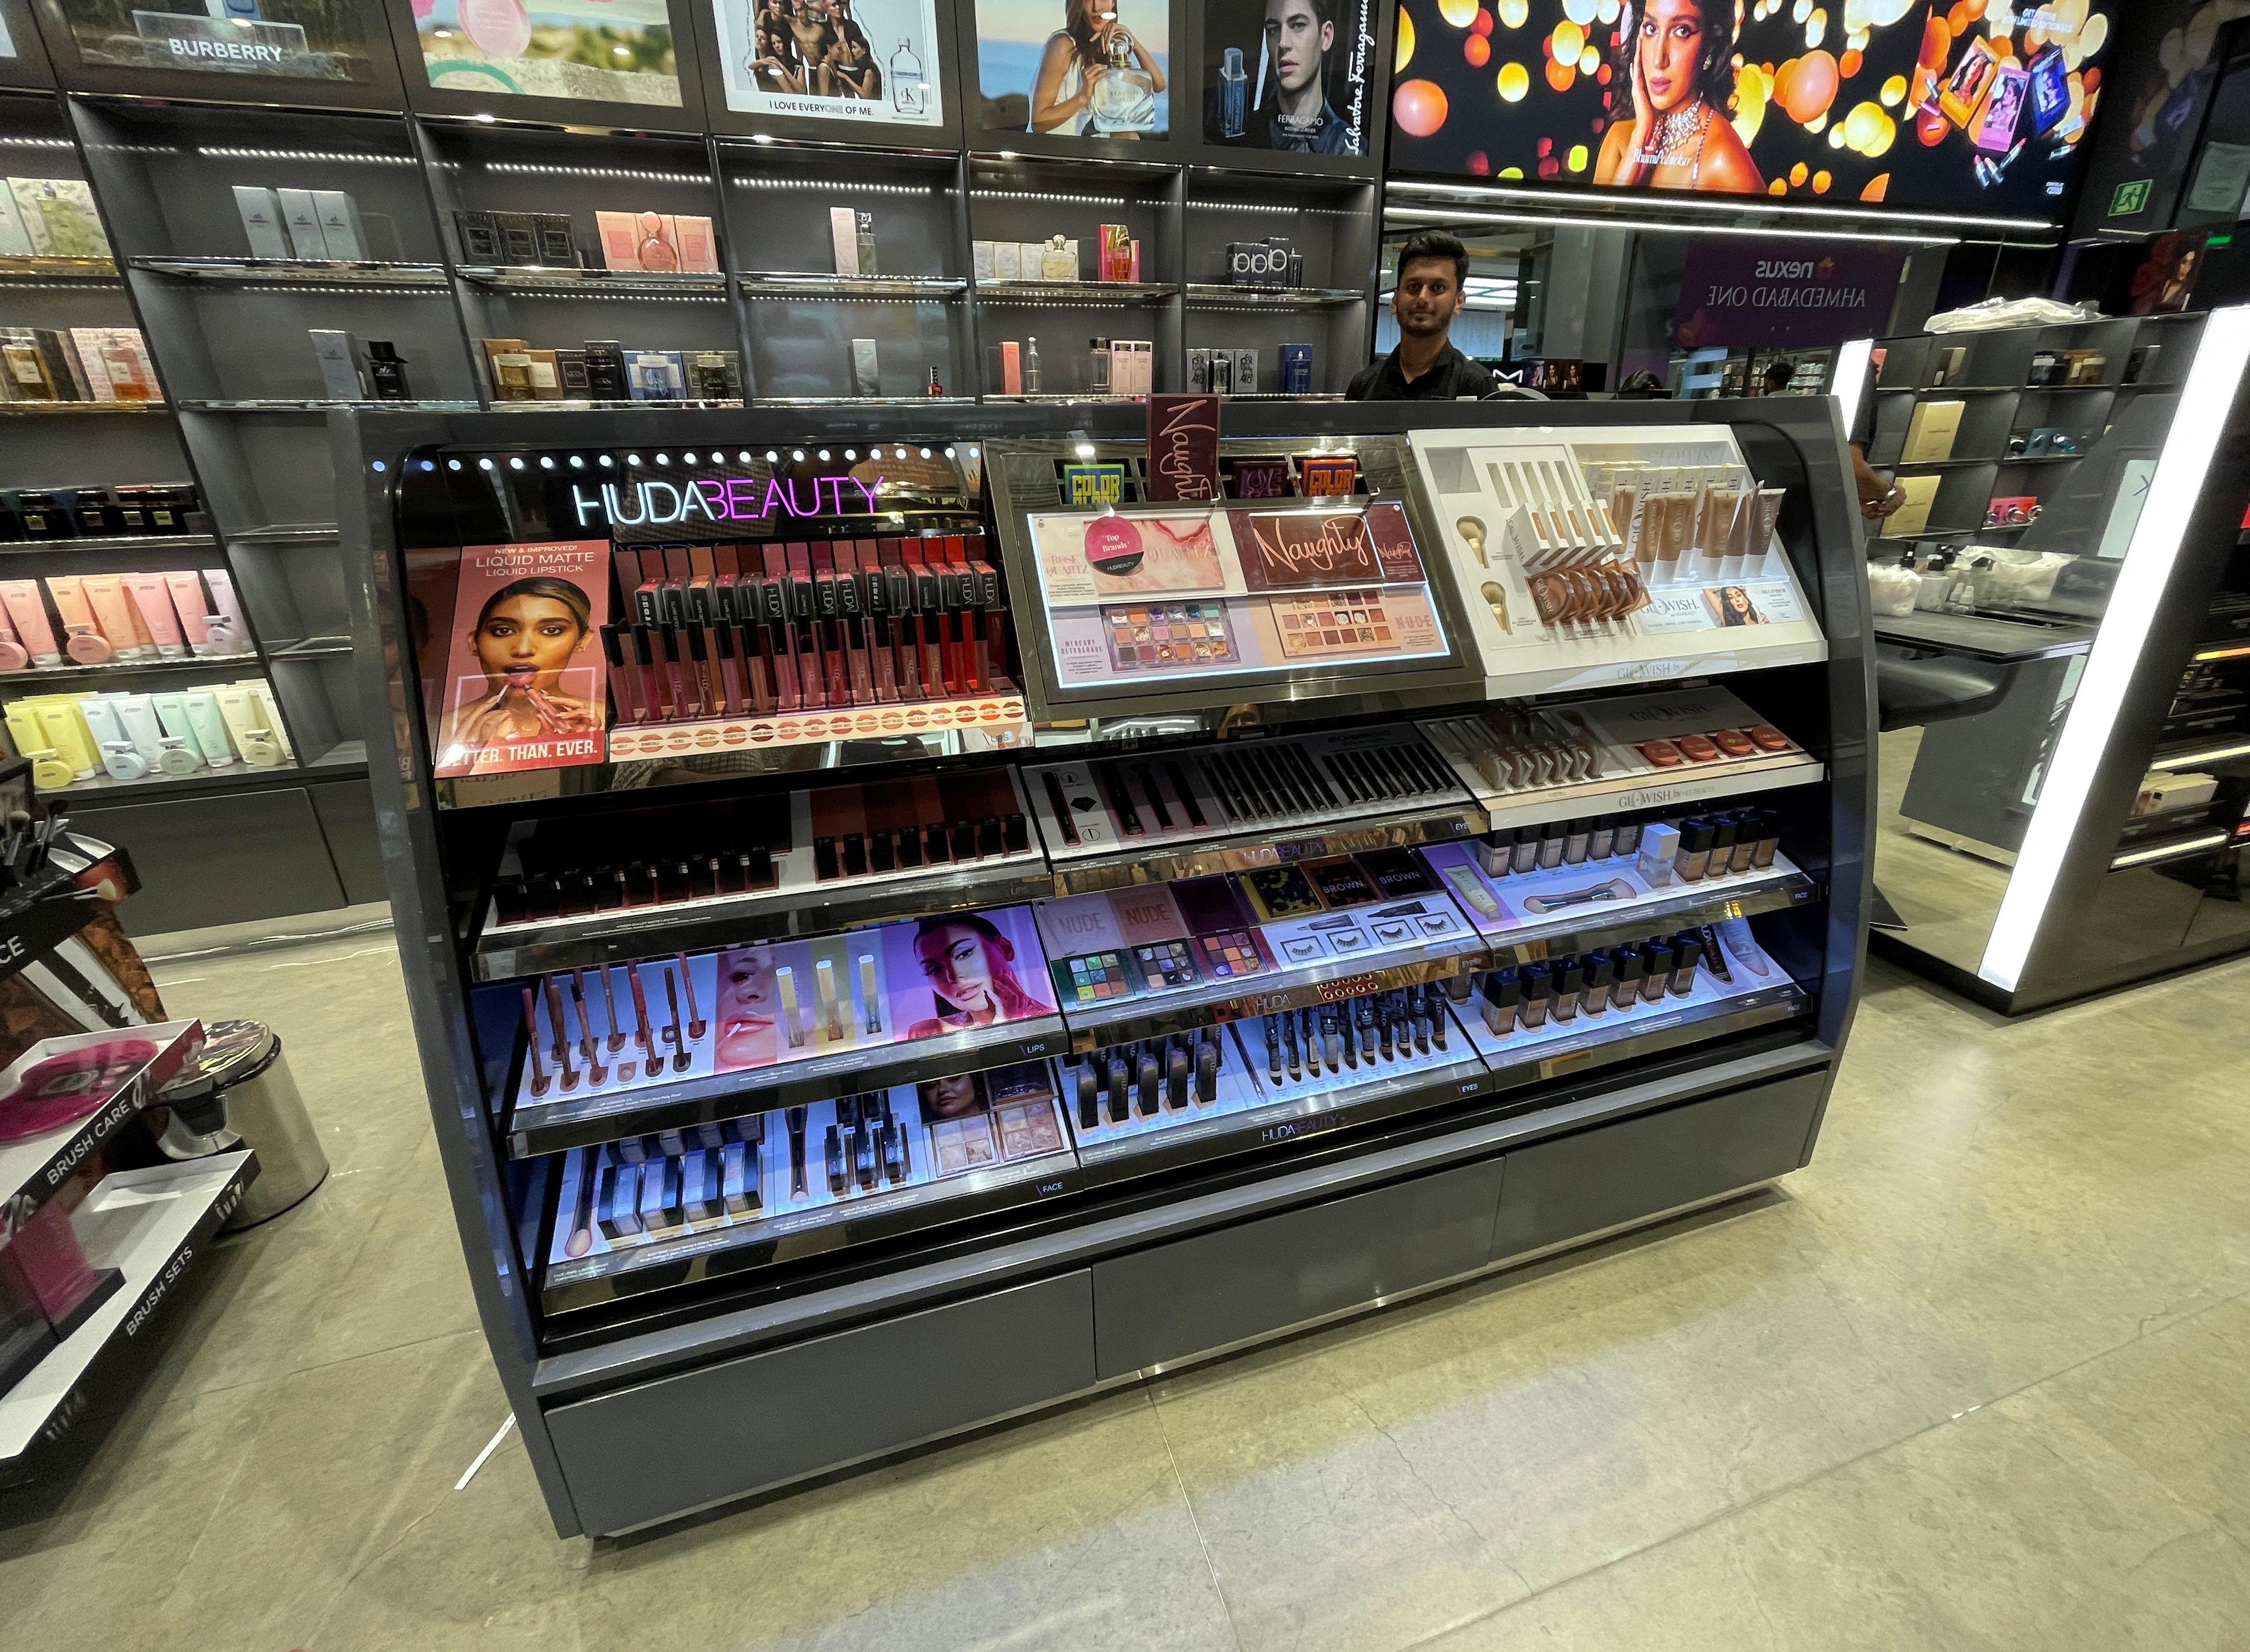 LVMH owned Sephora to open 7 stores in India this year, Retail